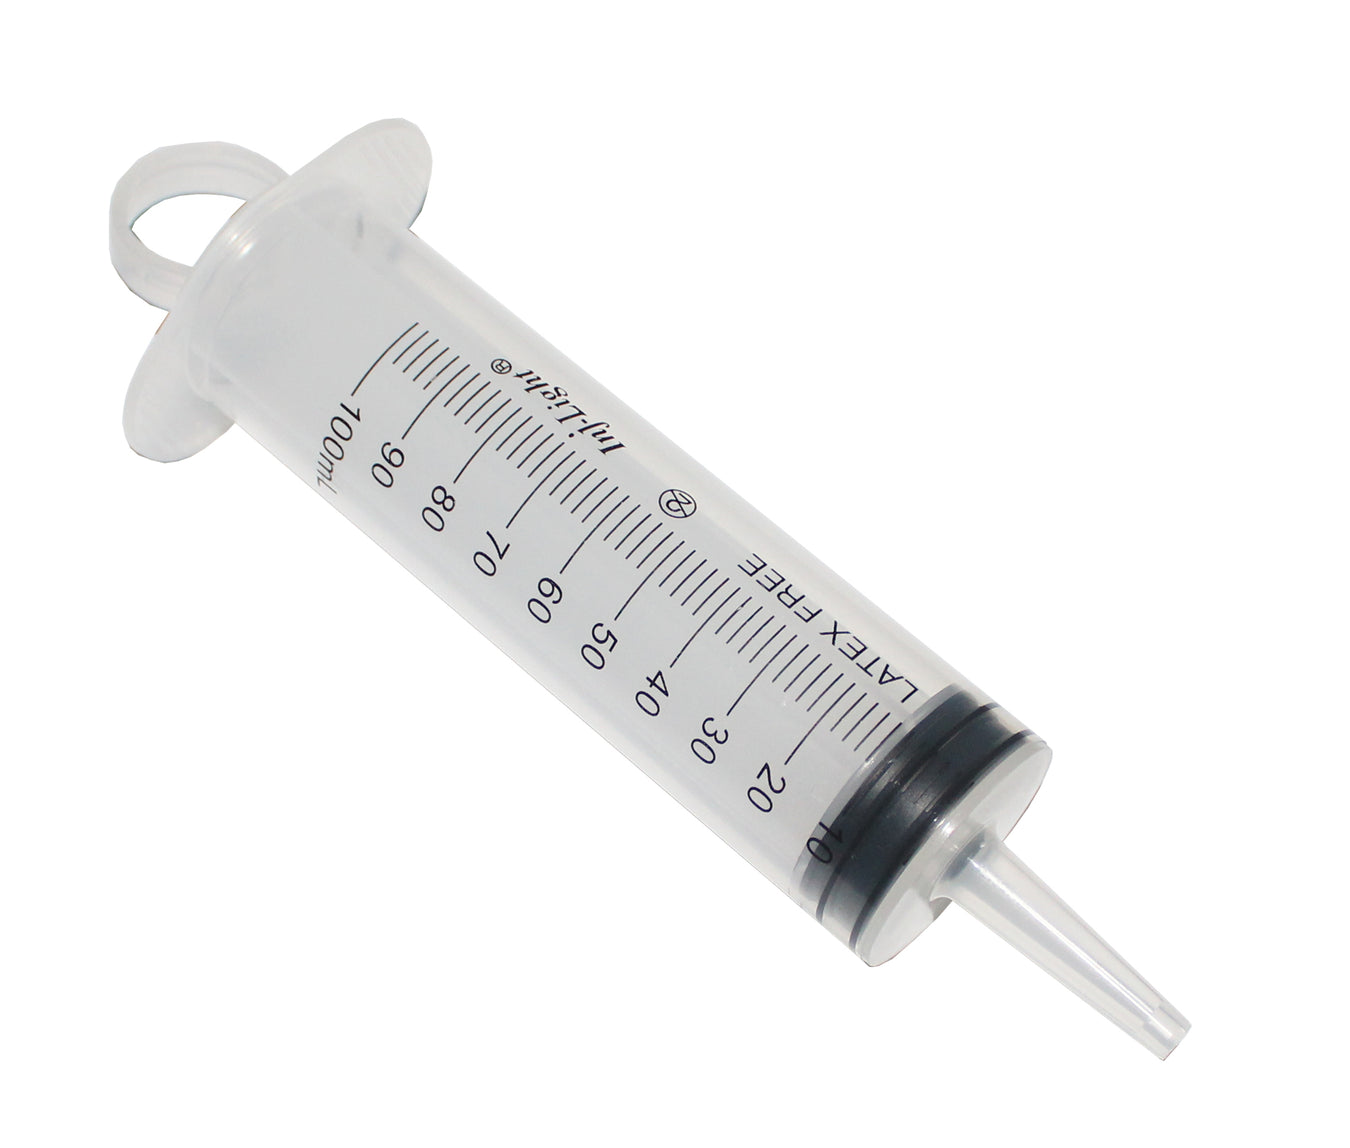 60ml and 100ml sterile catheter tip syringe available. 